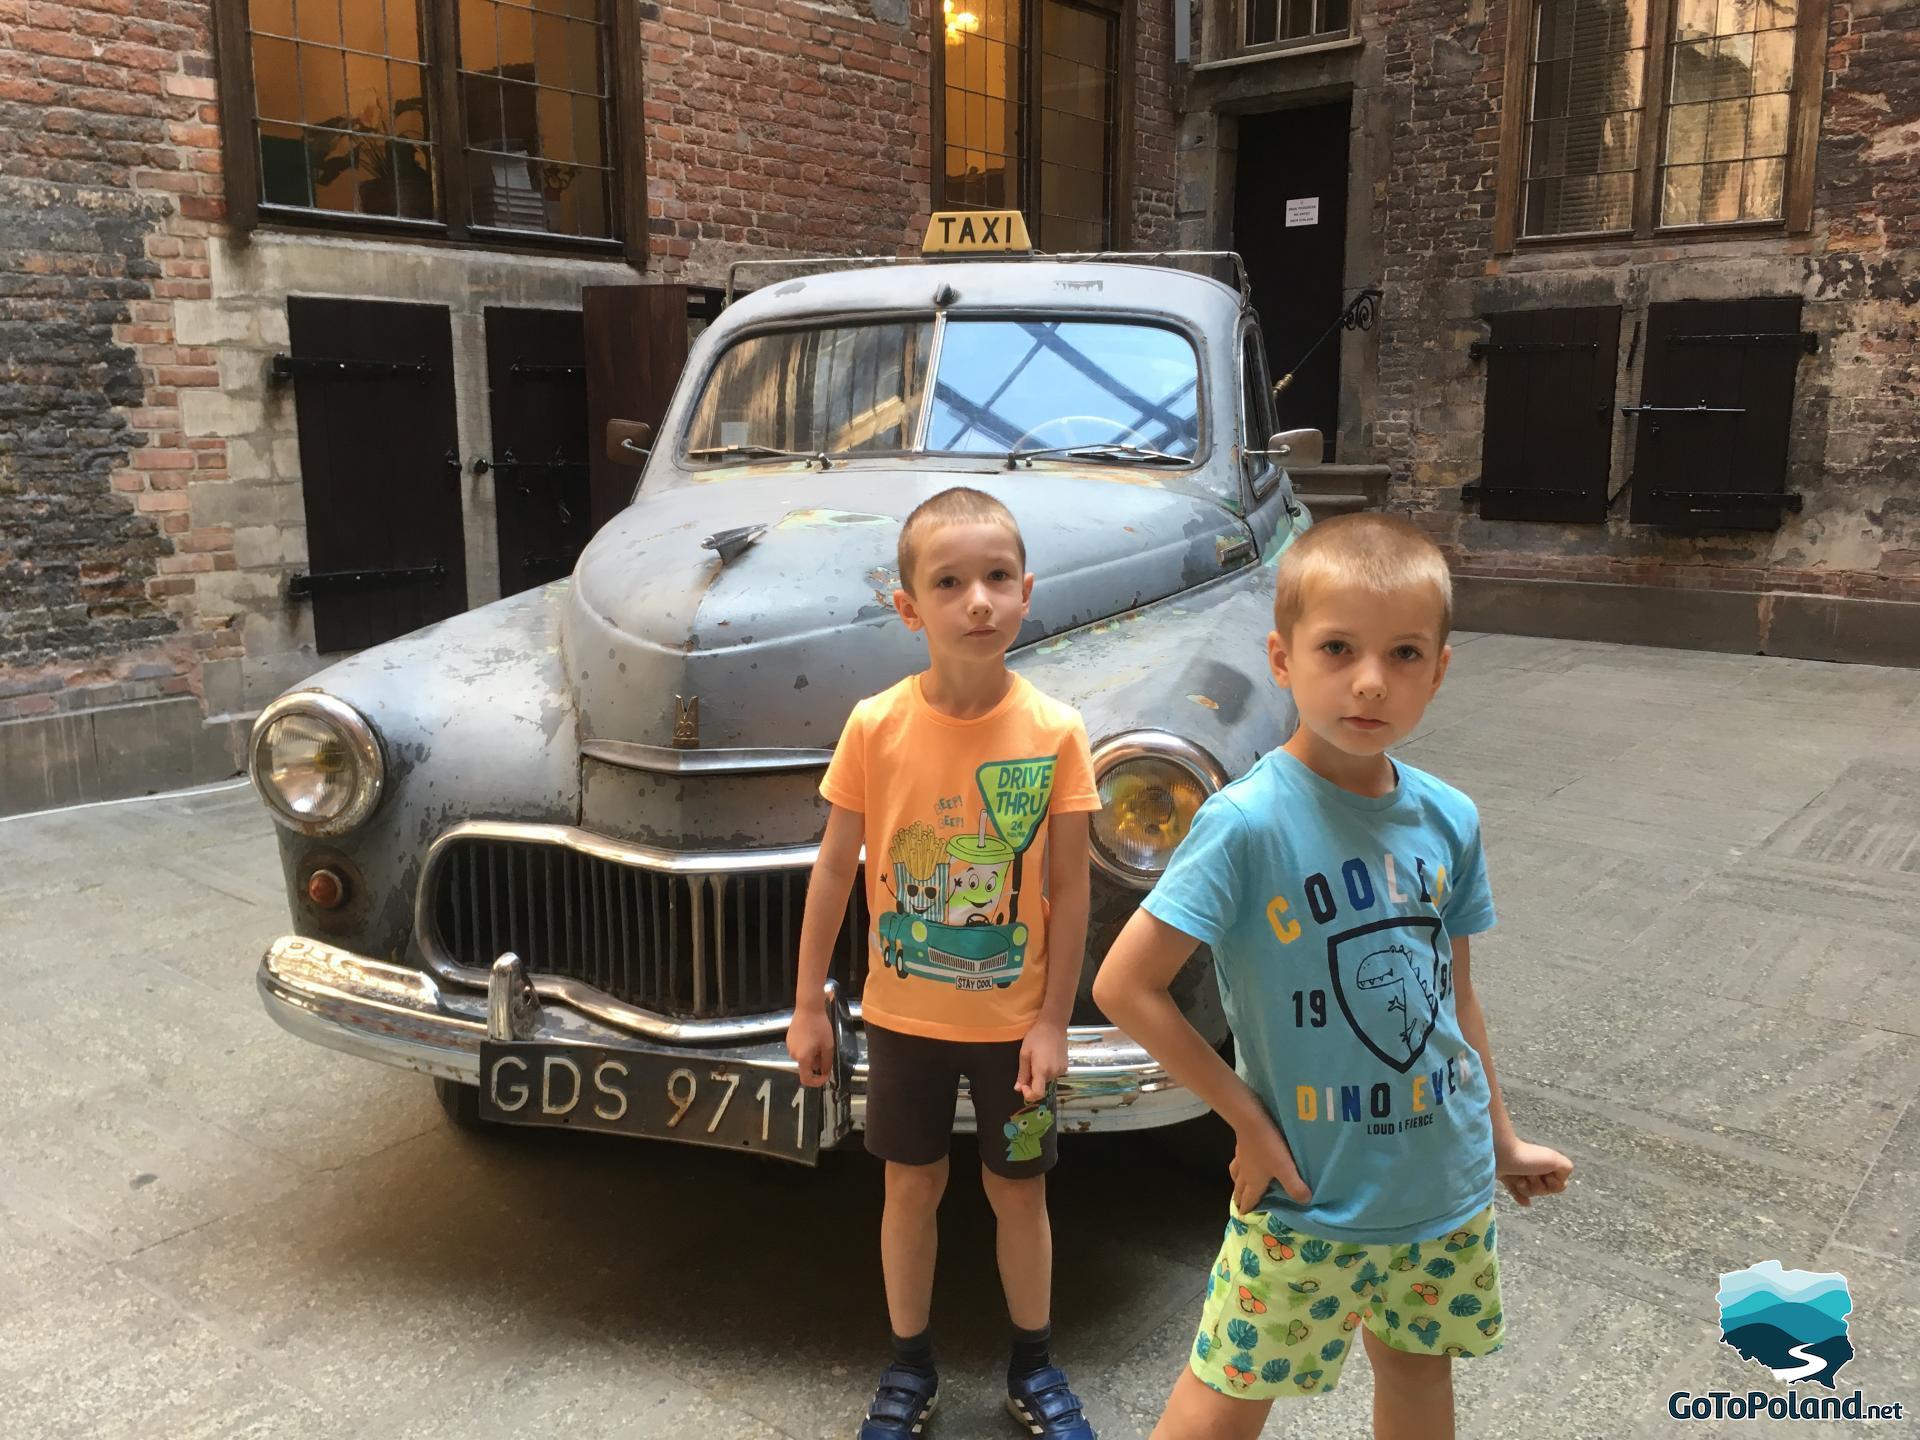 an old polish car called Warsaw is on an exhibition, two children in front of the car